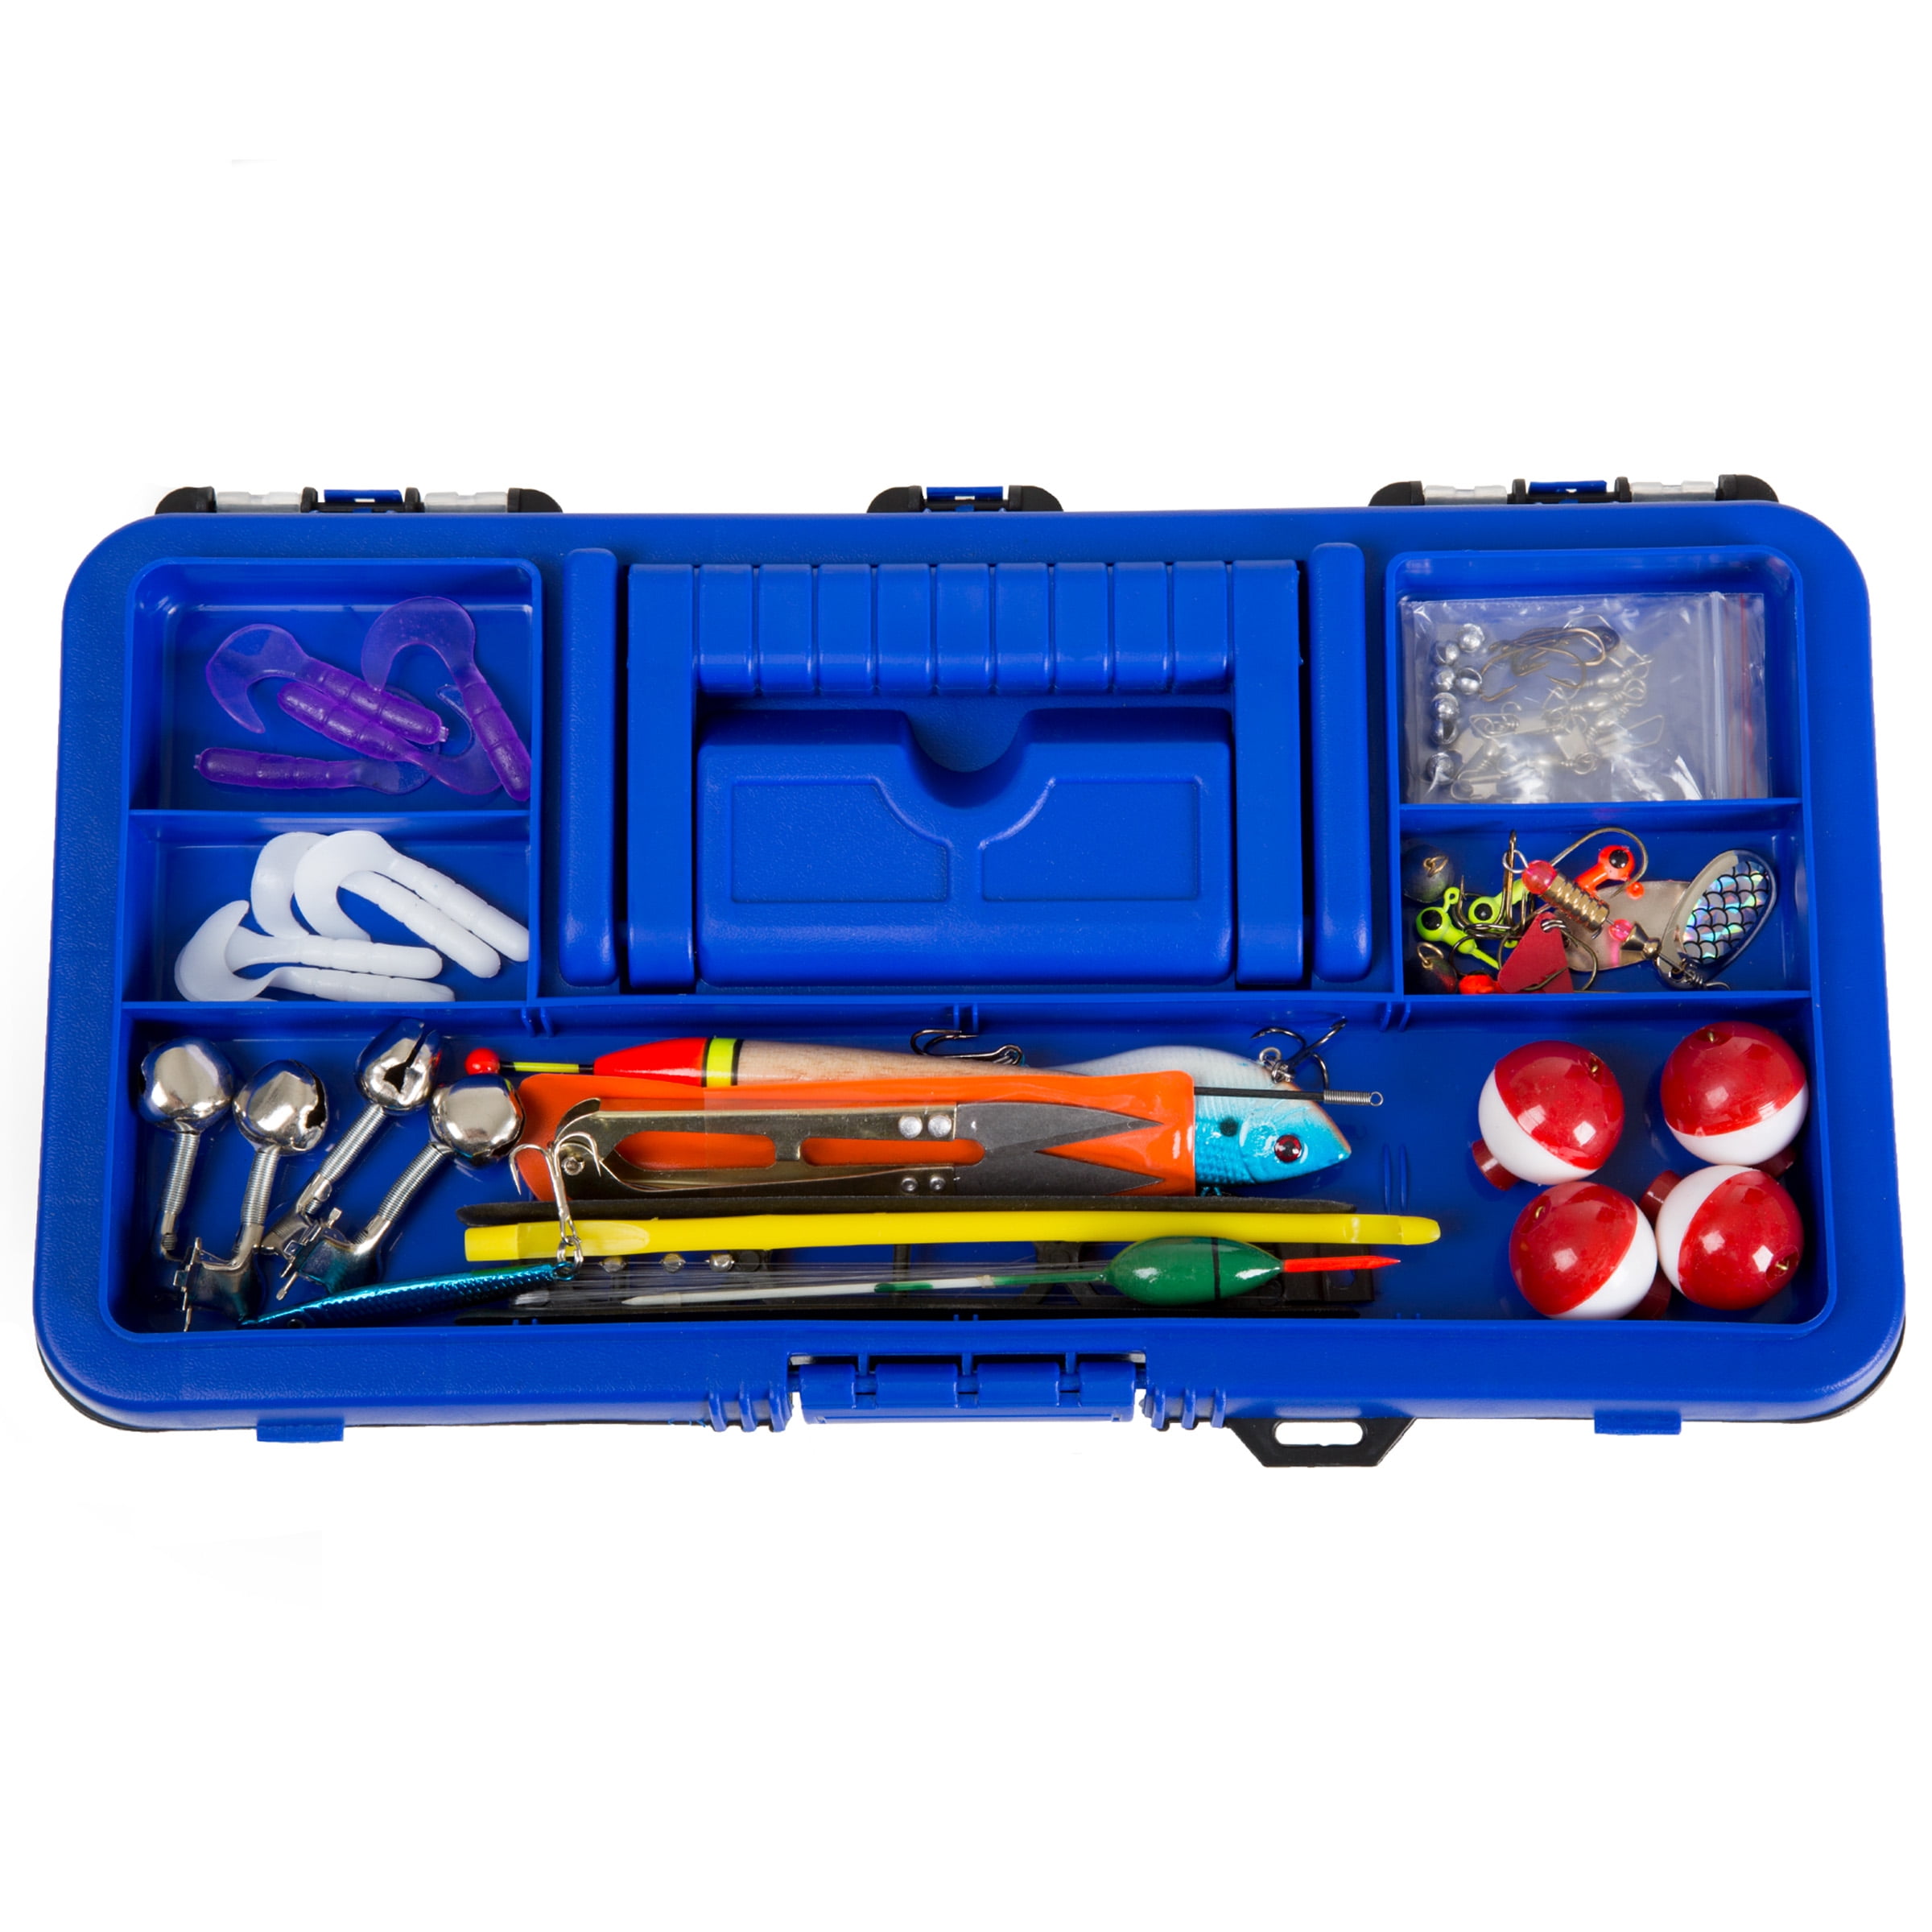 55-Piece Fishing Tackle Set – Tackle Box Includes Sinkers, Hooks